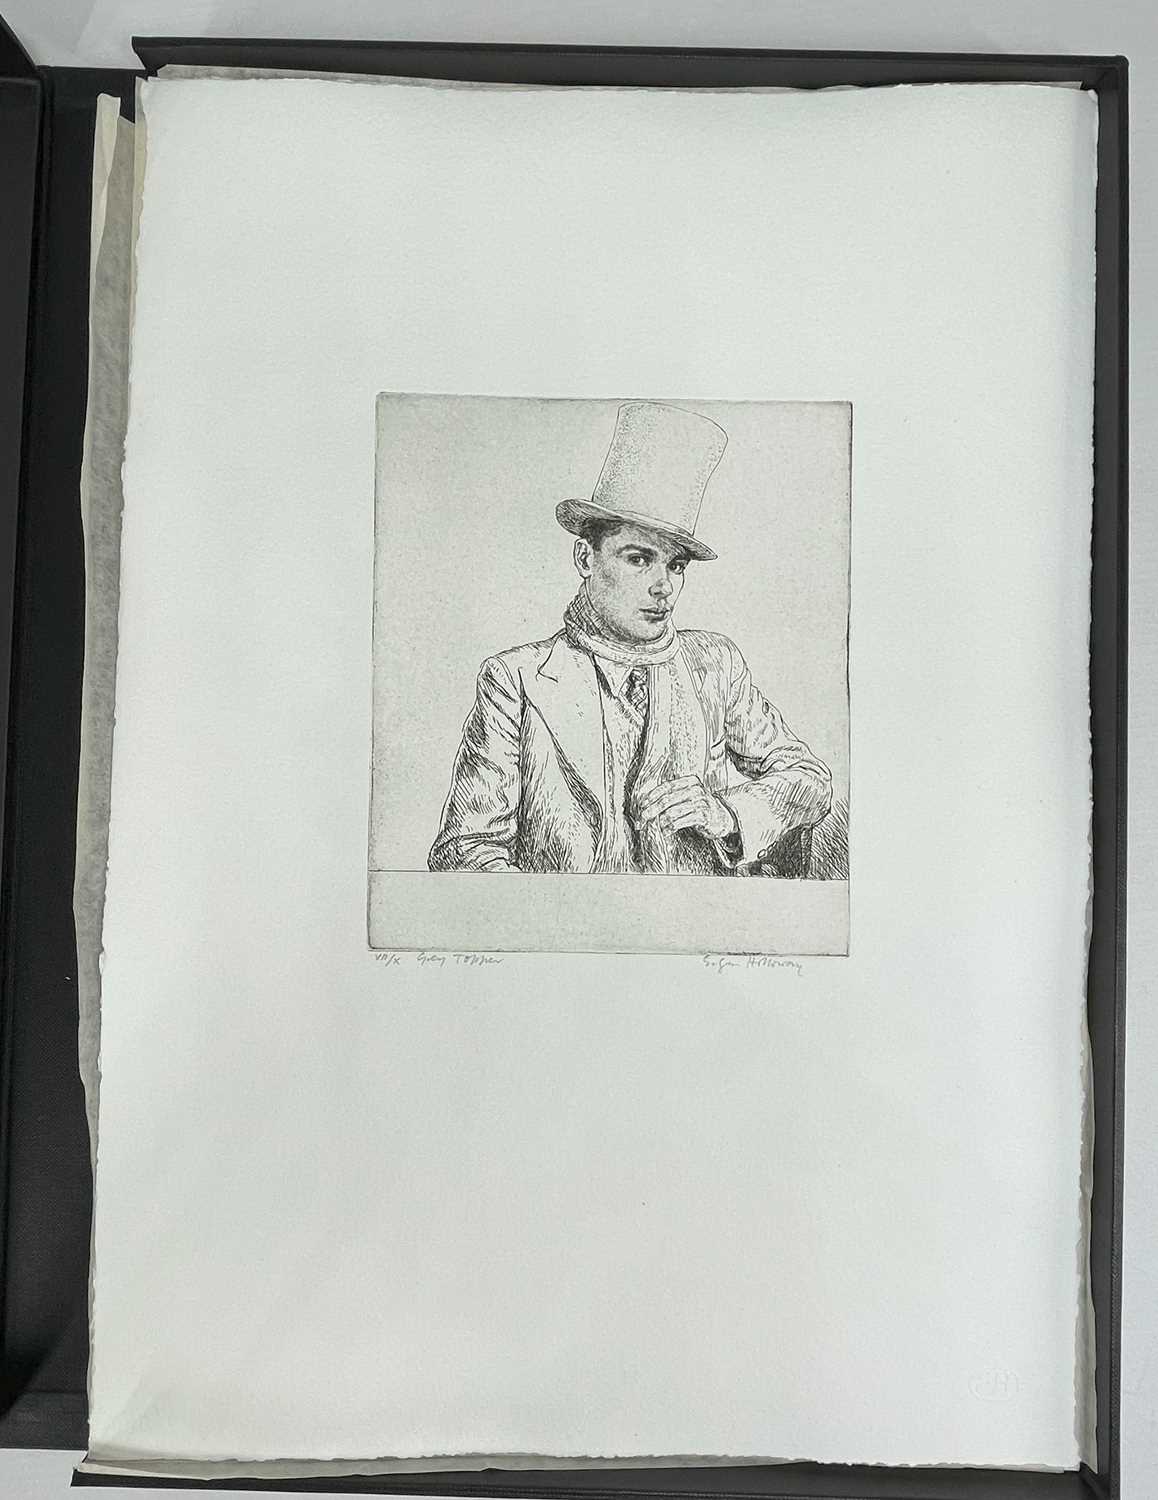 ‡ EDGAR HOLLOWAY limited edition (7/40) portfolio of seven etchings and engravings produced by - Image 8 of 13